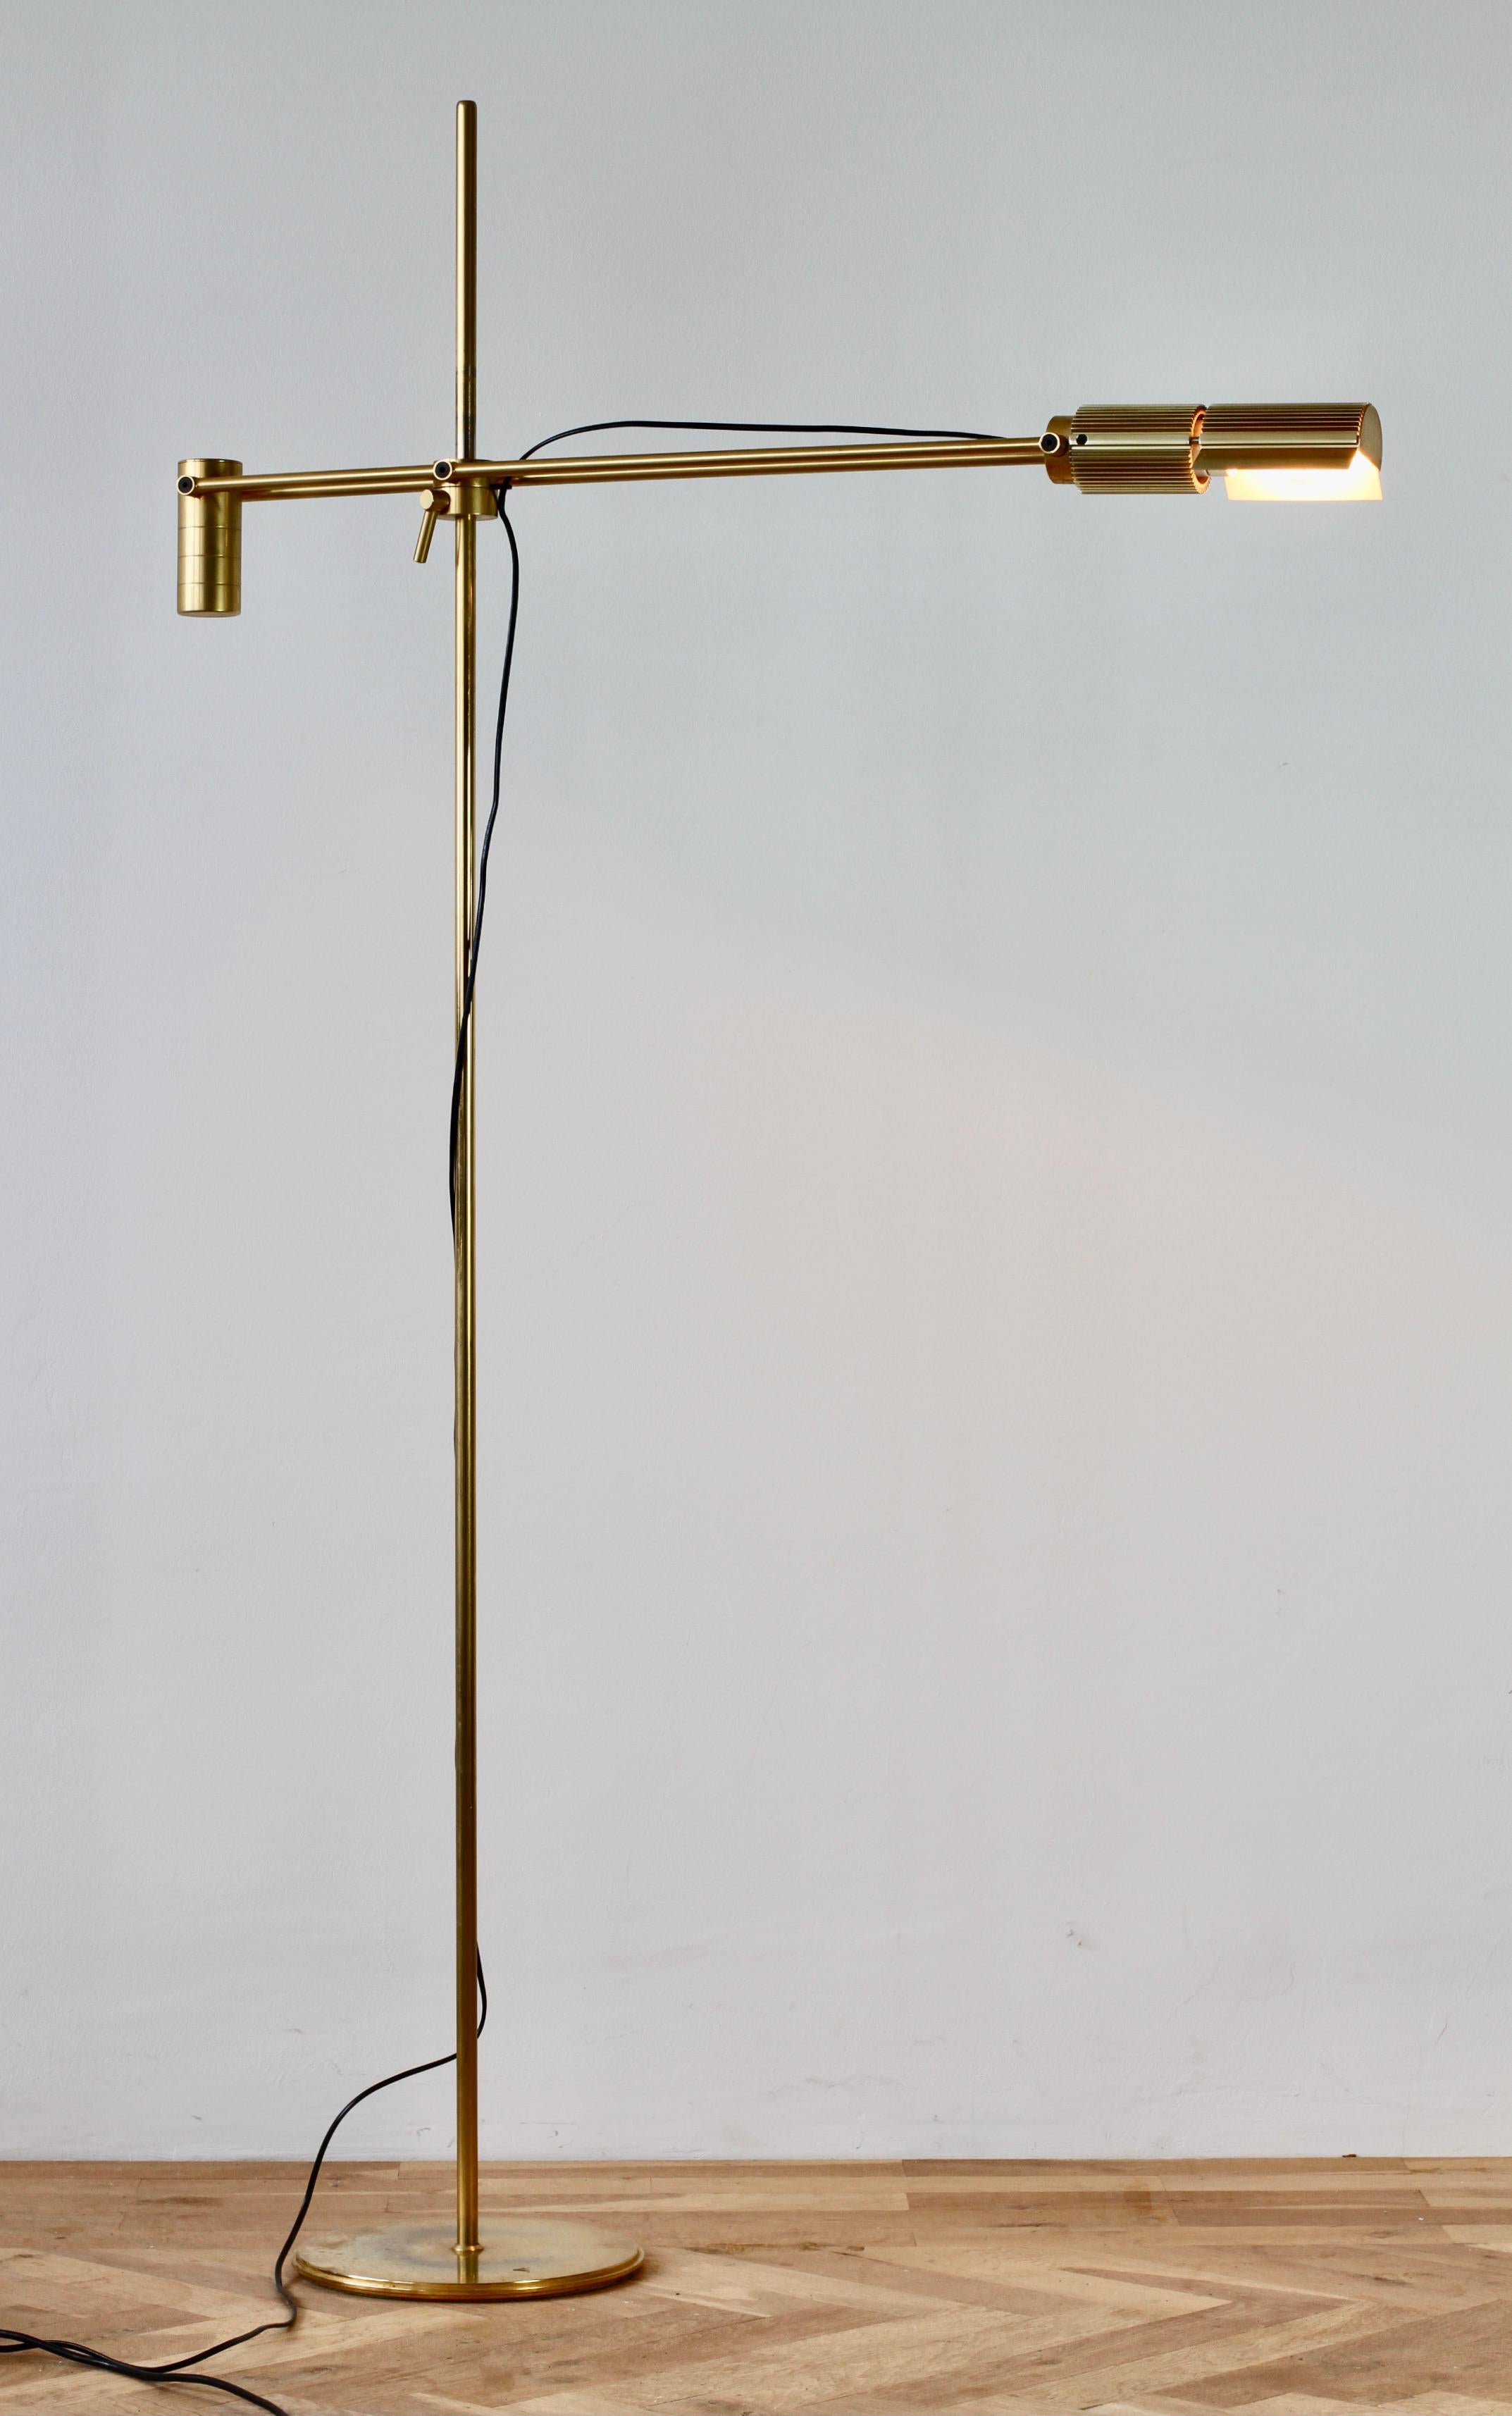 Rare Mid-Century Modern vintage Swiss made dimmable 'Haloprofil' floor lamp designed by Viktor Frauenknecht for Swiss Lamps International circa 1970s - early 1980s. Featuring gold plated brass (now with age related patina) and fully height